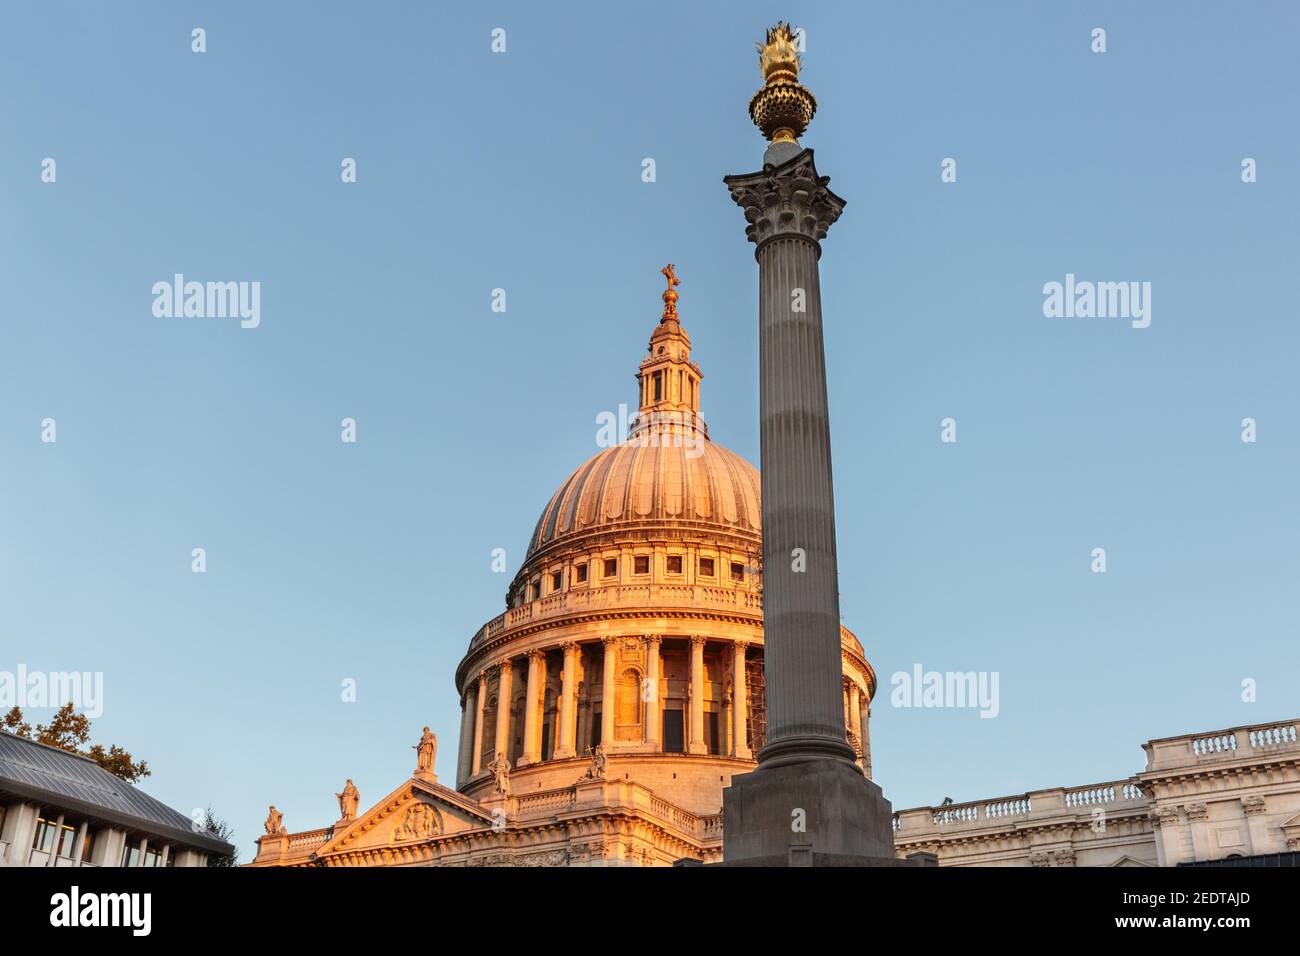 St Paul's Cathedral and the Paternoster Square Column,basked in warm sunlight, London UK Stock Photo